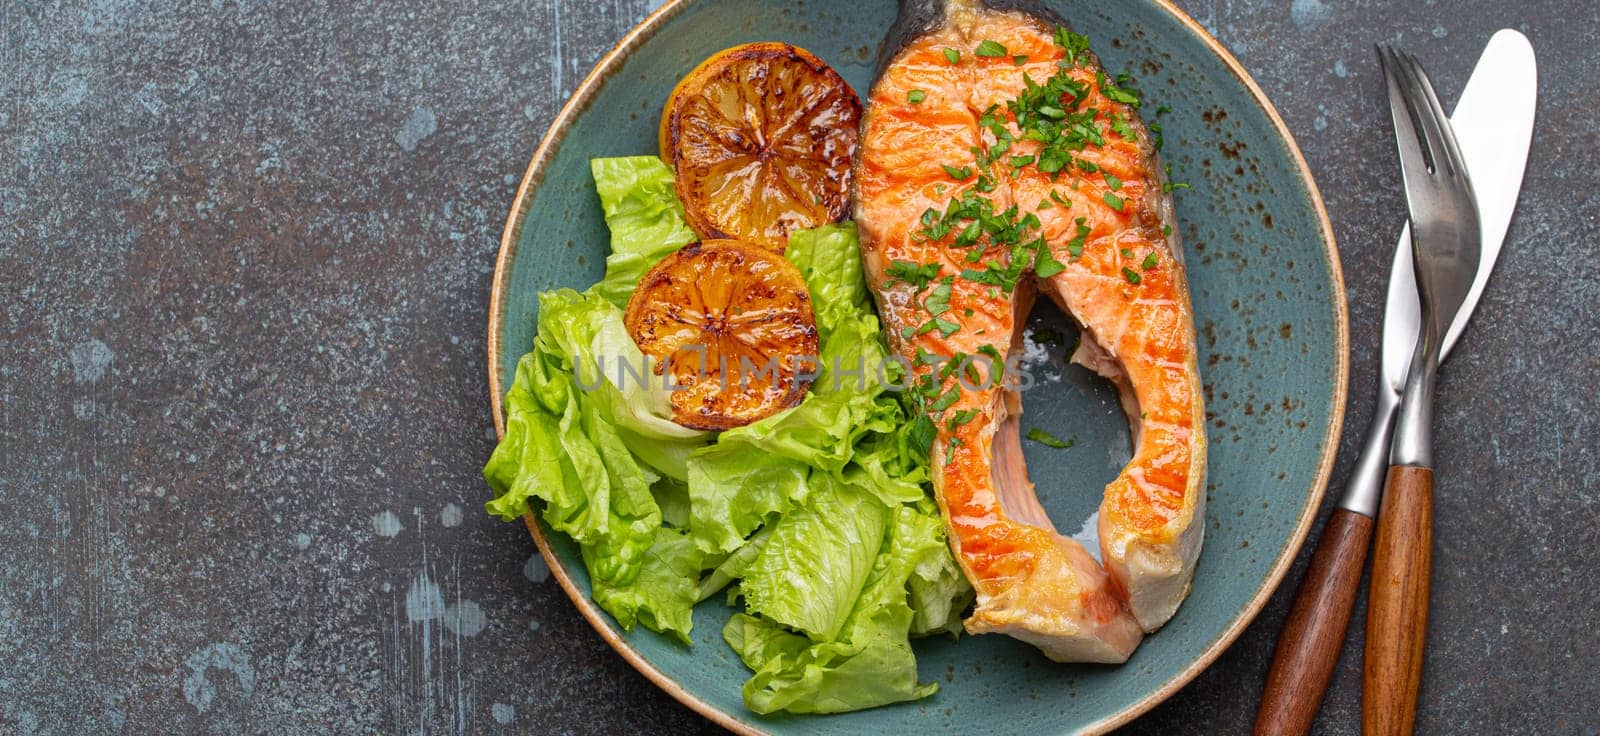 Grilled fish salmon steak and green salad with lemon on ceramic plate on rustic blue stone background top view, balanced diet or healthy nutrition meal with salmon and veggies, space for text.